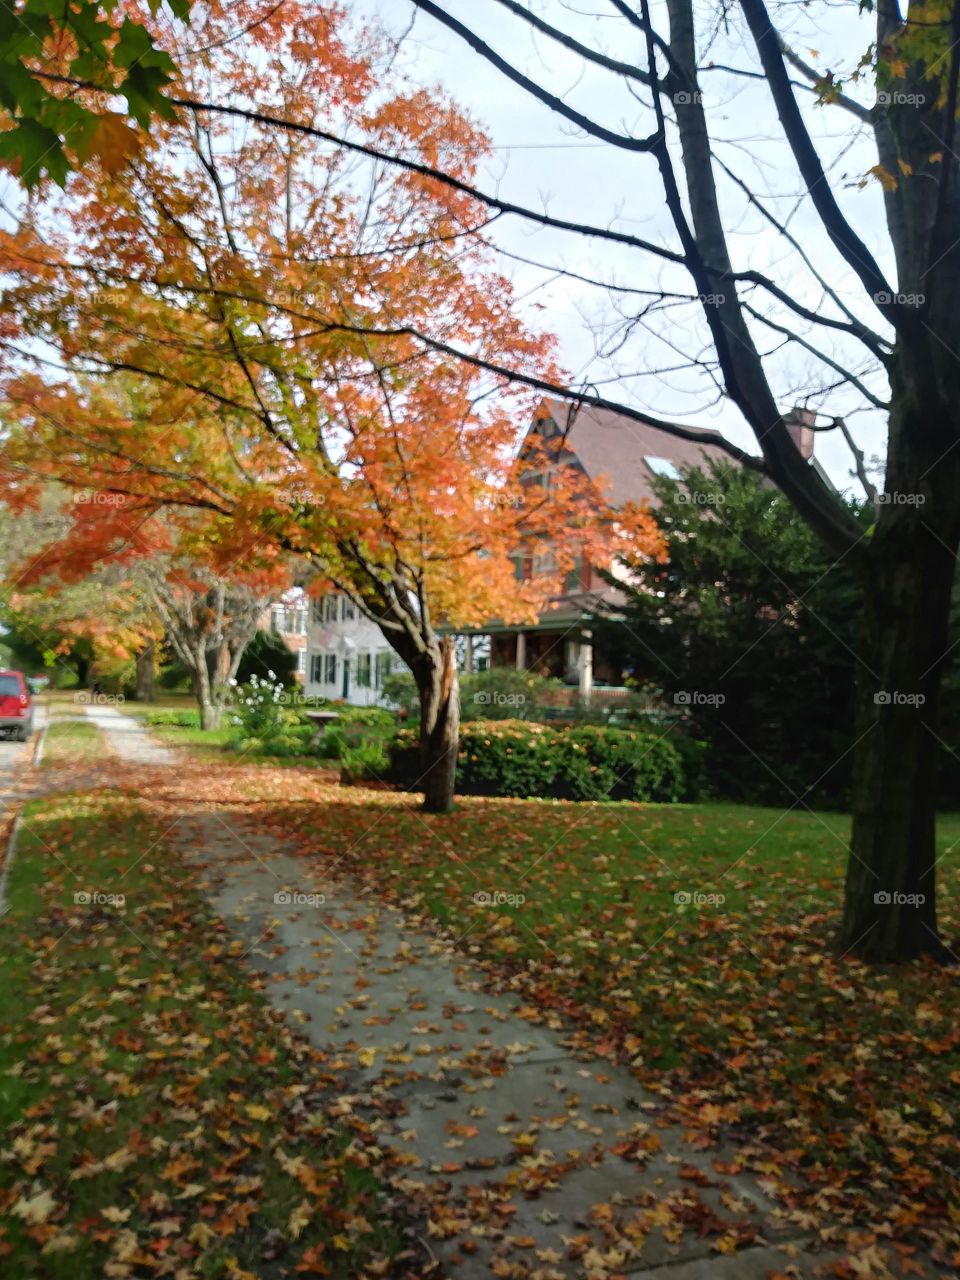 such a peaceful little town, fall is in full bloom.